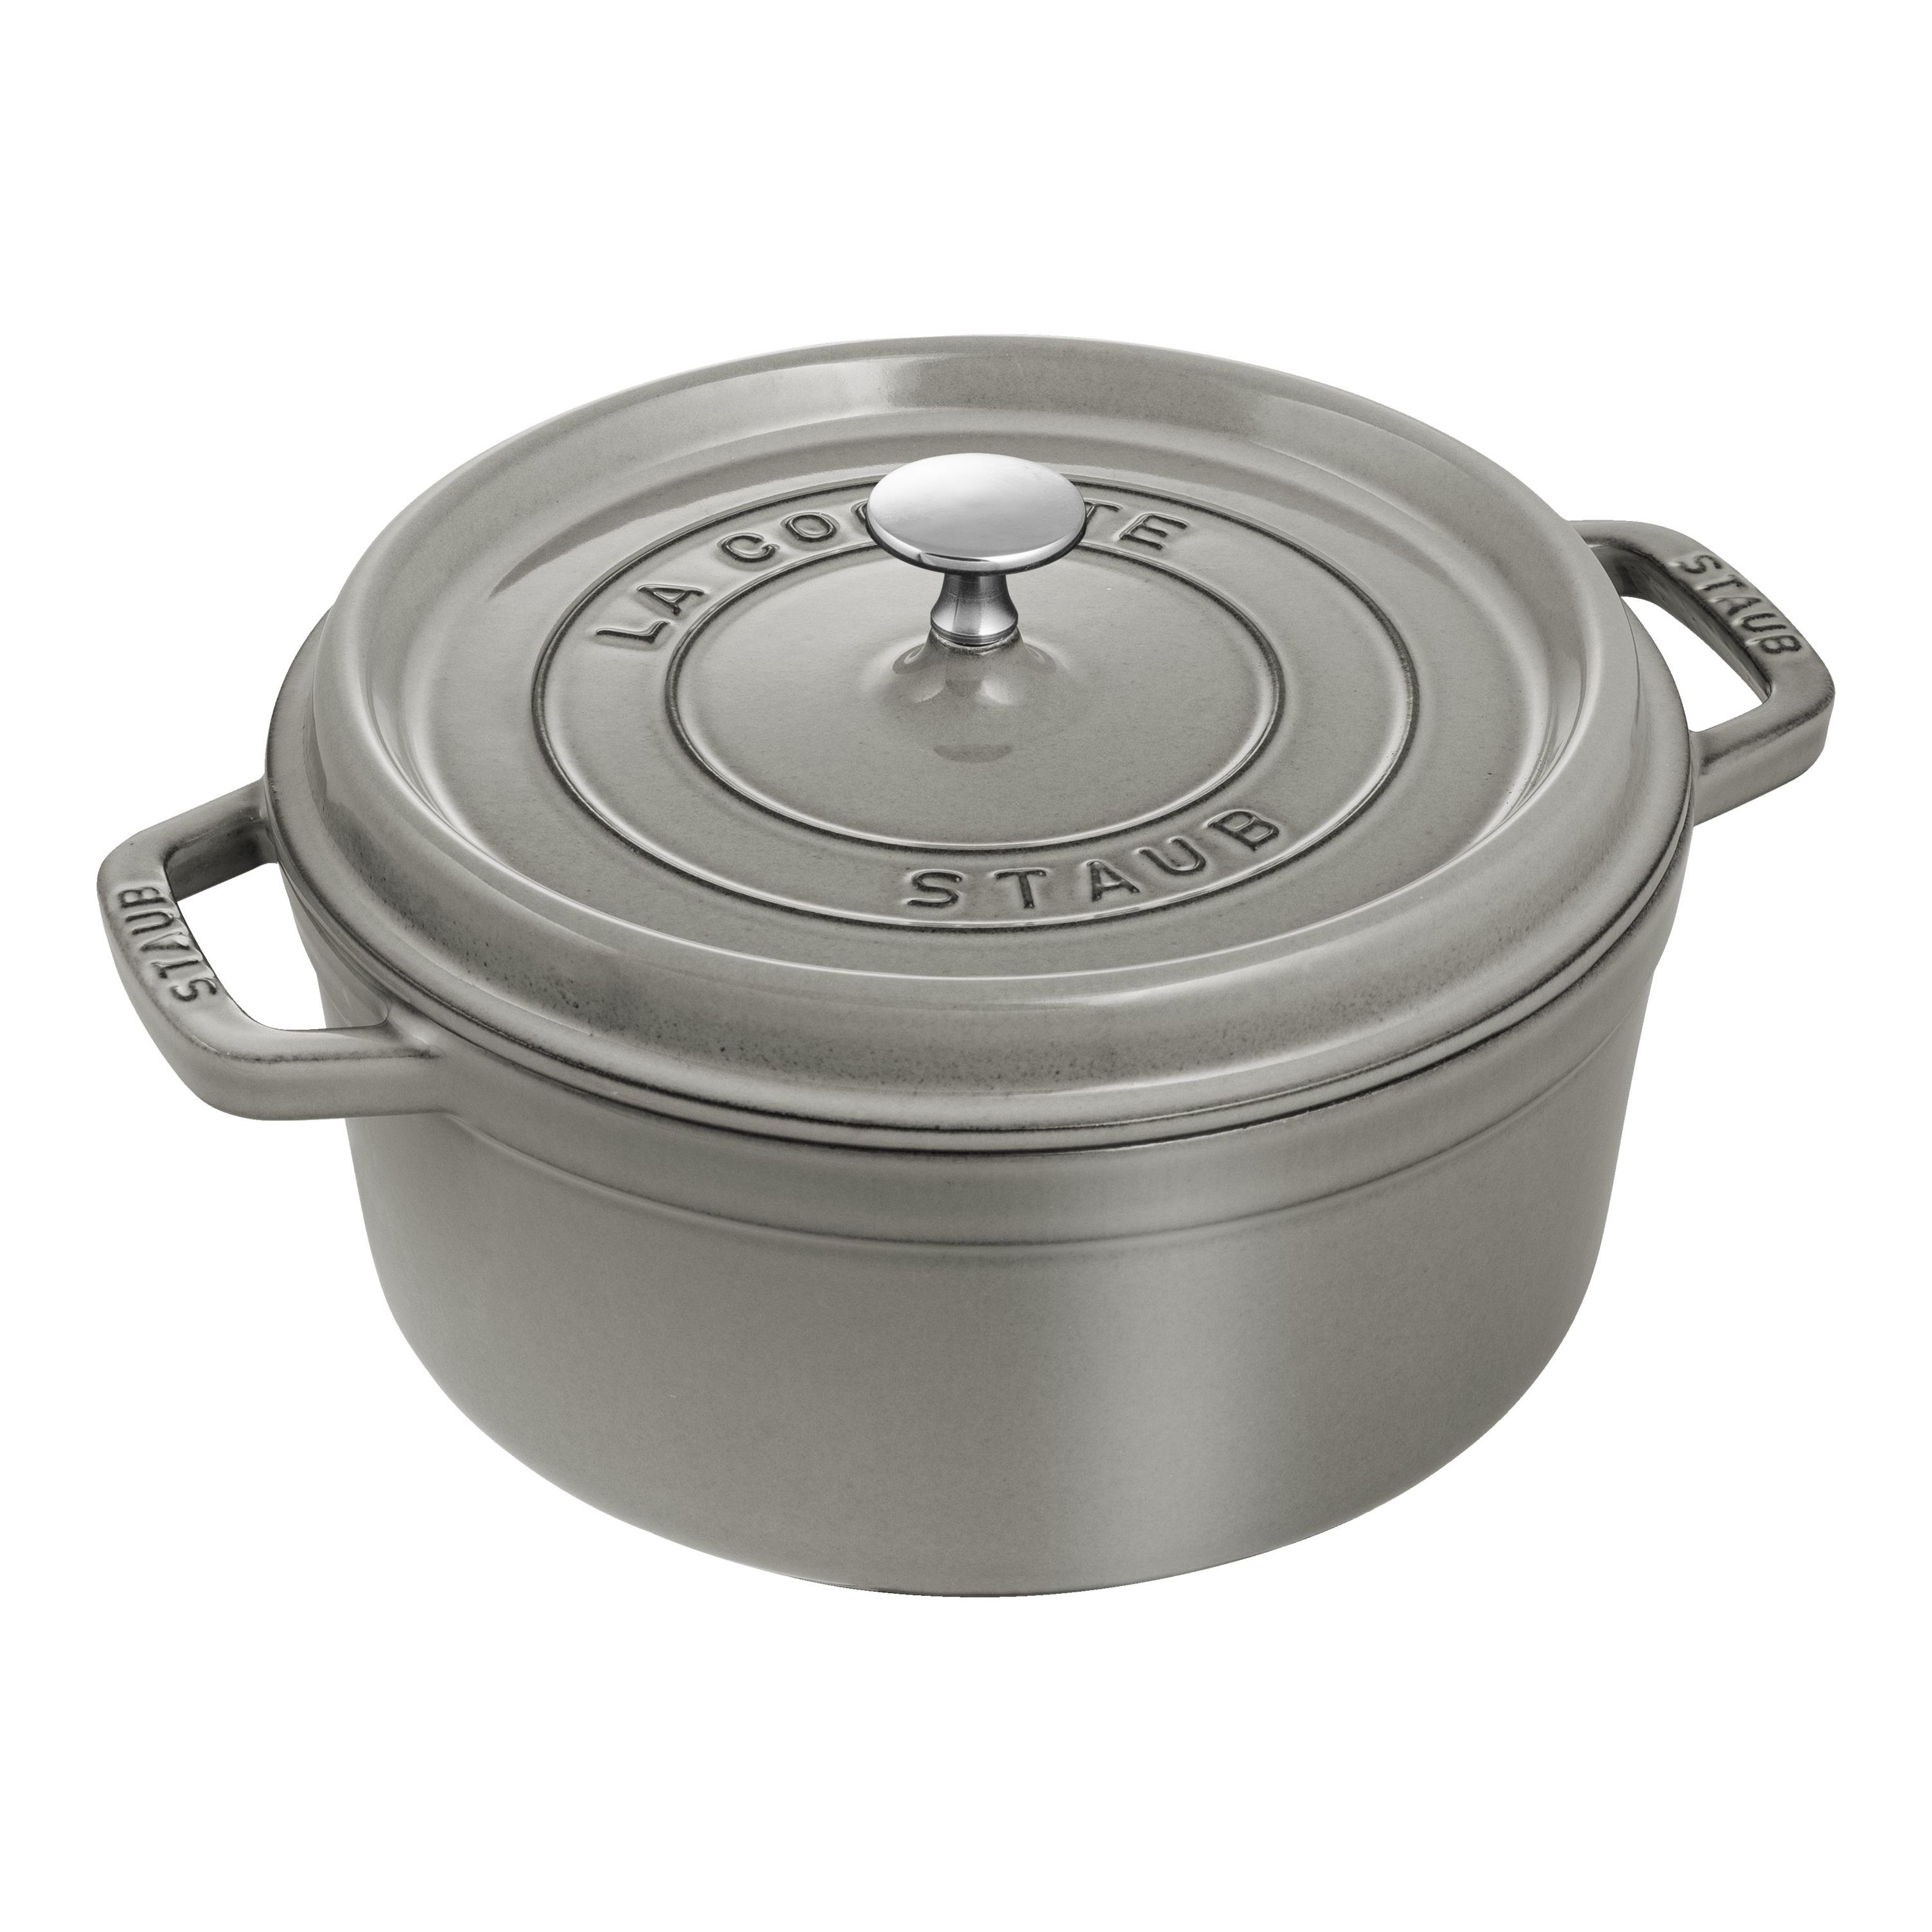 Staub Cast Iron 4-qt Round Cocotte with Glass Lid - Graphite Grey